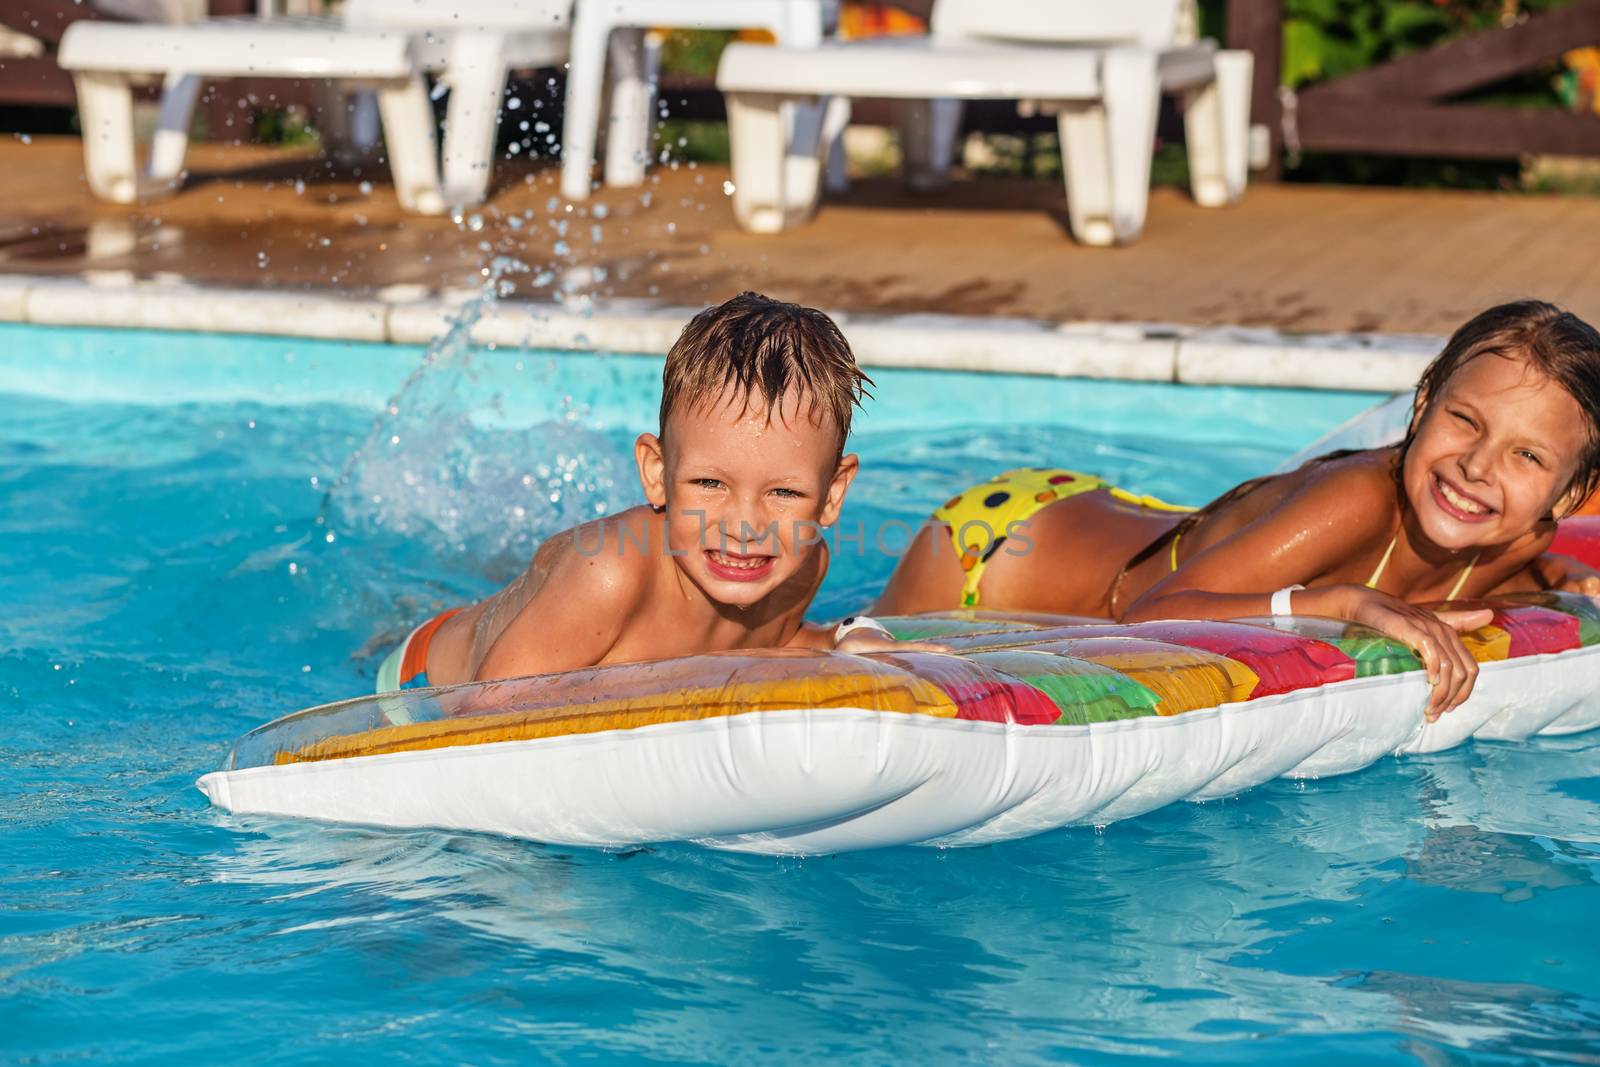 Little children on inflatable mattress in swimming pool. Smiling kids playing and having fun in swimming pool with air mattress. Boy and girl playing in water. Summer vacations concept.